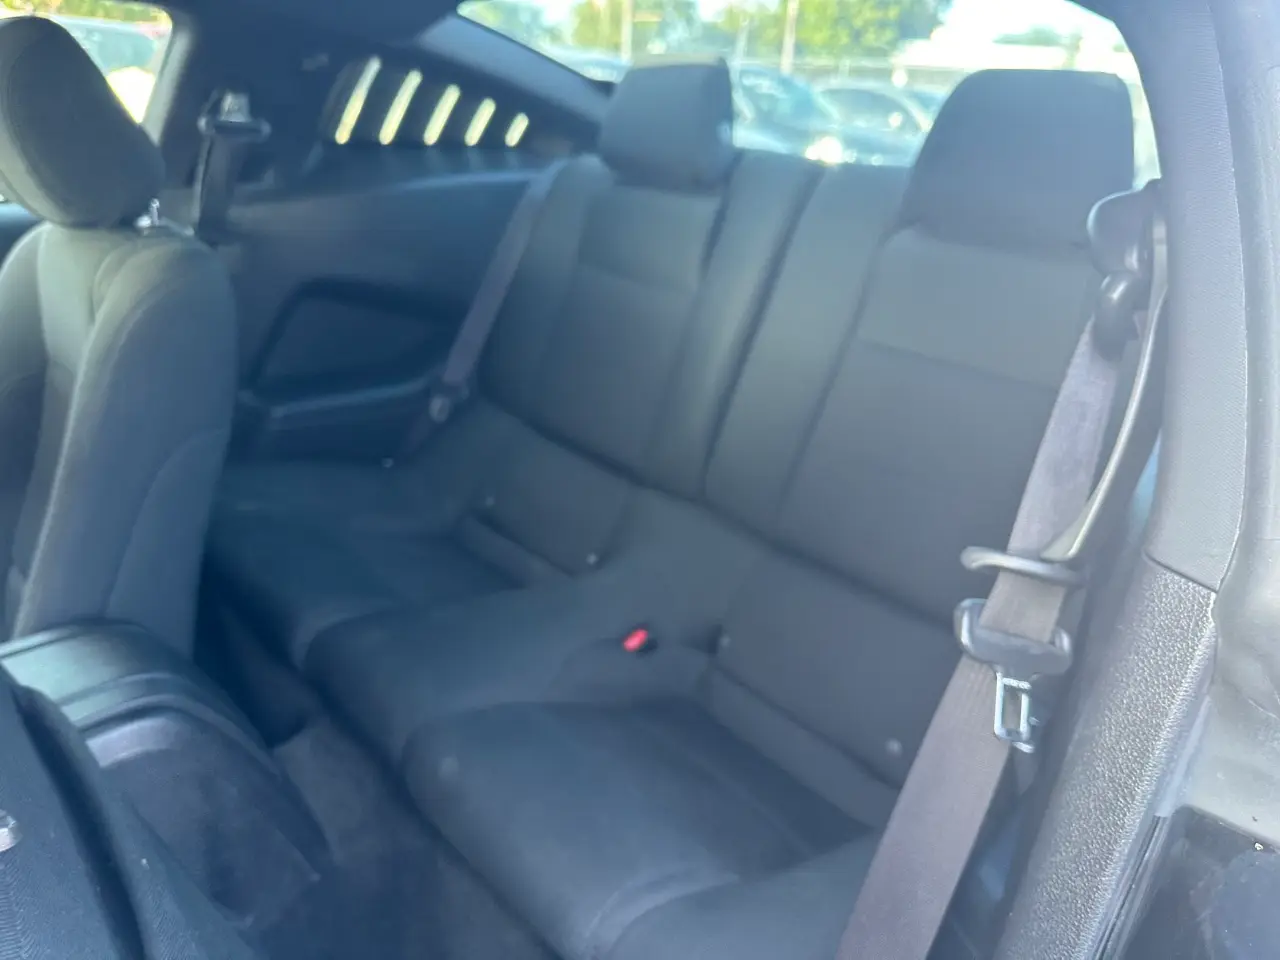 used 2014 Ford Mustang - interior view 2